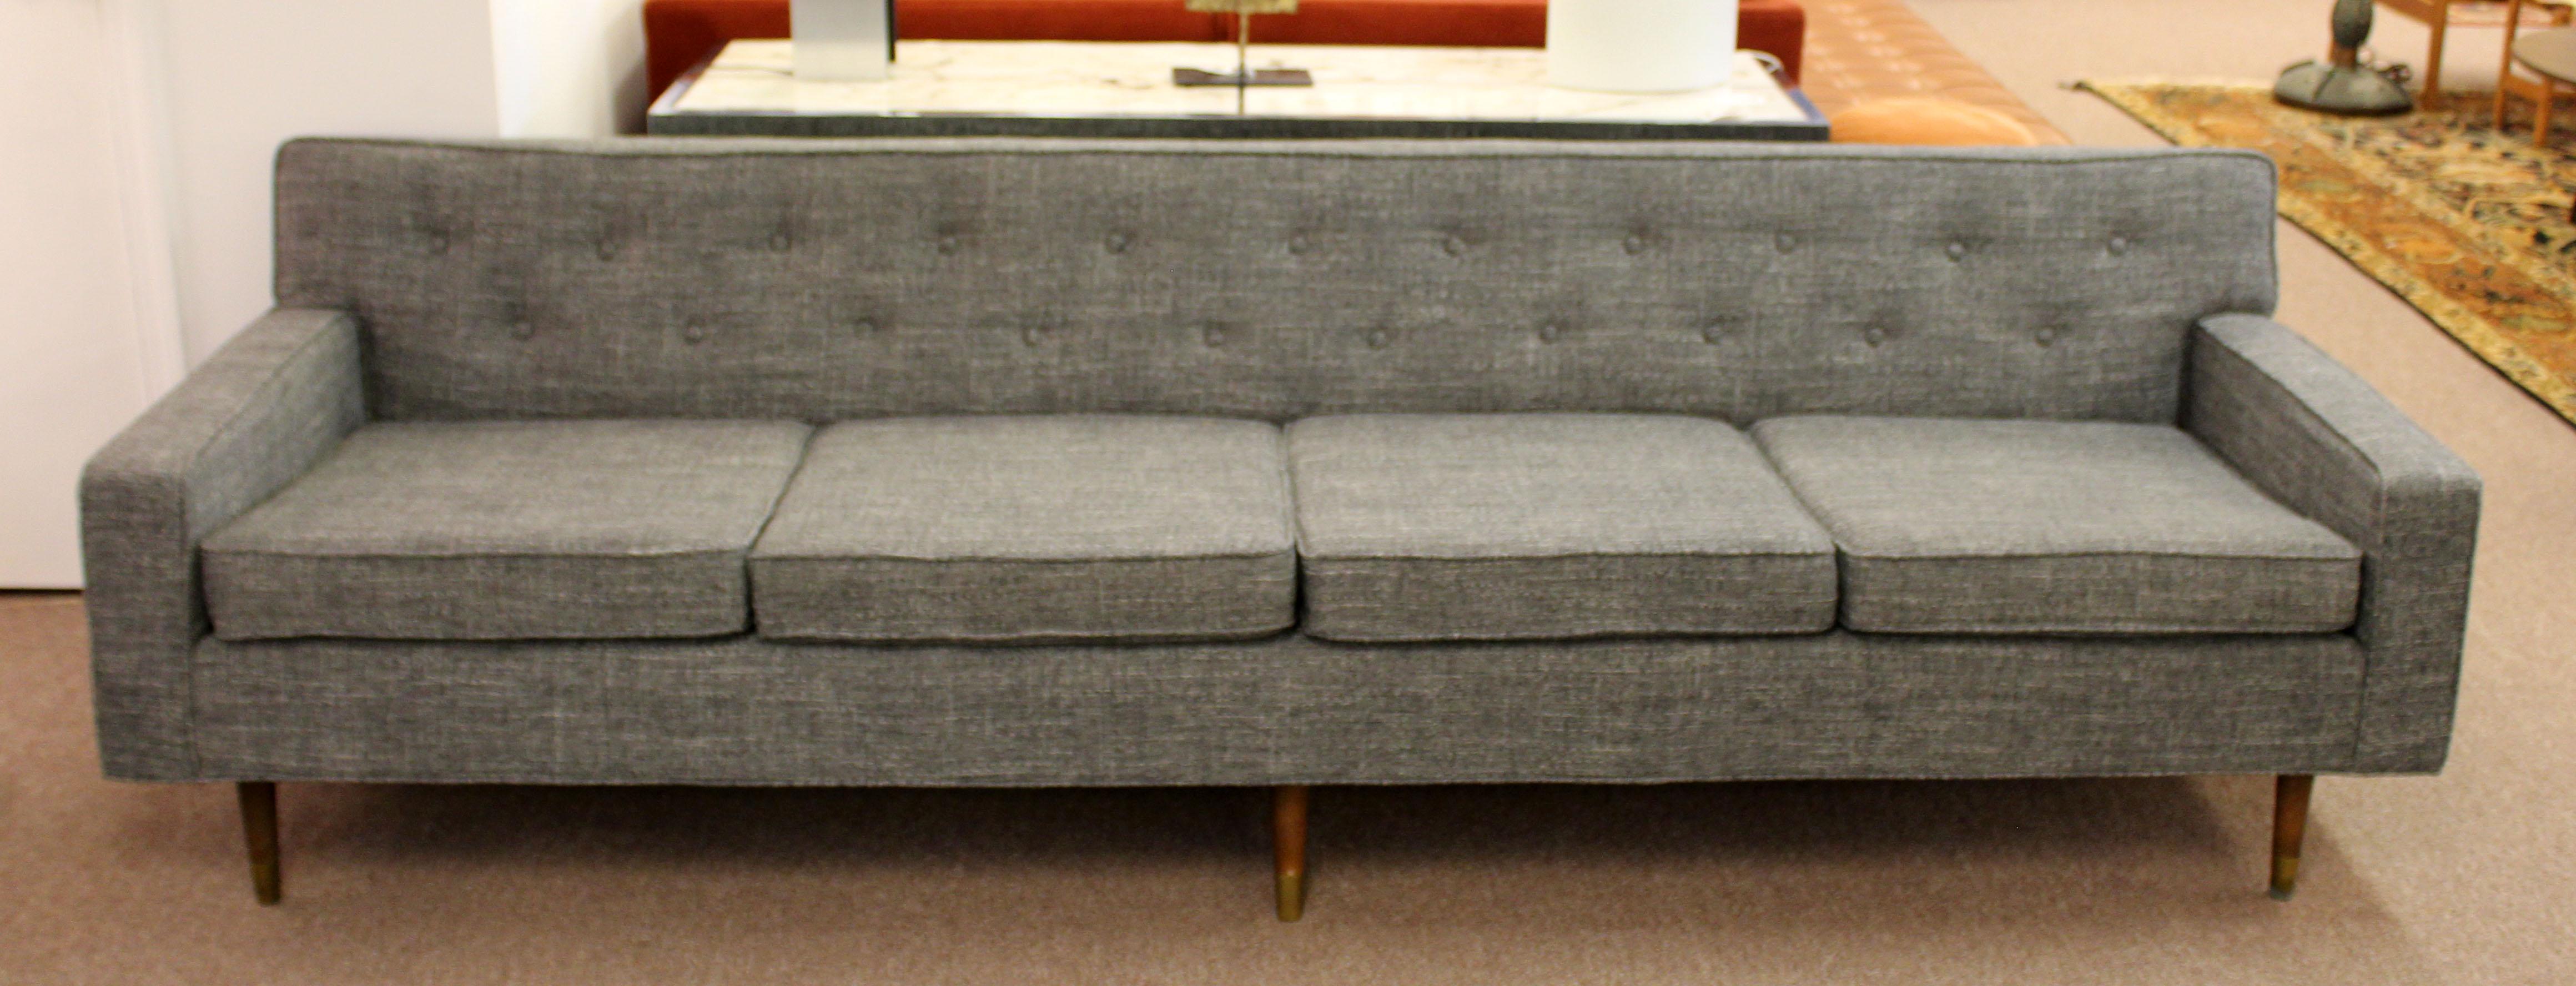 For your consideration is a marvelous long sofa, with a gray upholstery on walnut wood legs, by Milo Baughman for Thayer Coggin, circa the 1960s. In excellent condition. Recently professionally reupholstered in Knoll Fabric. The dimensions are 96